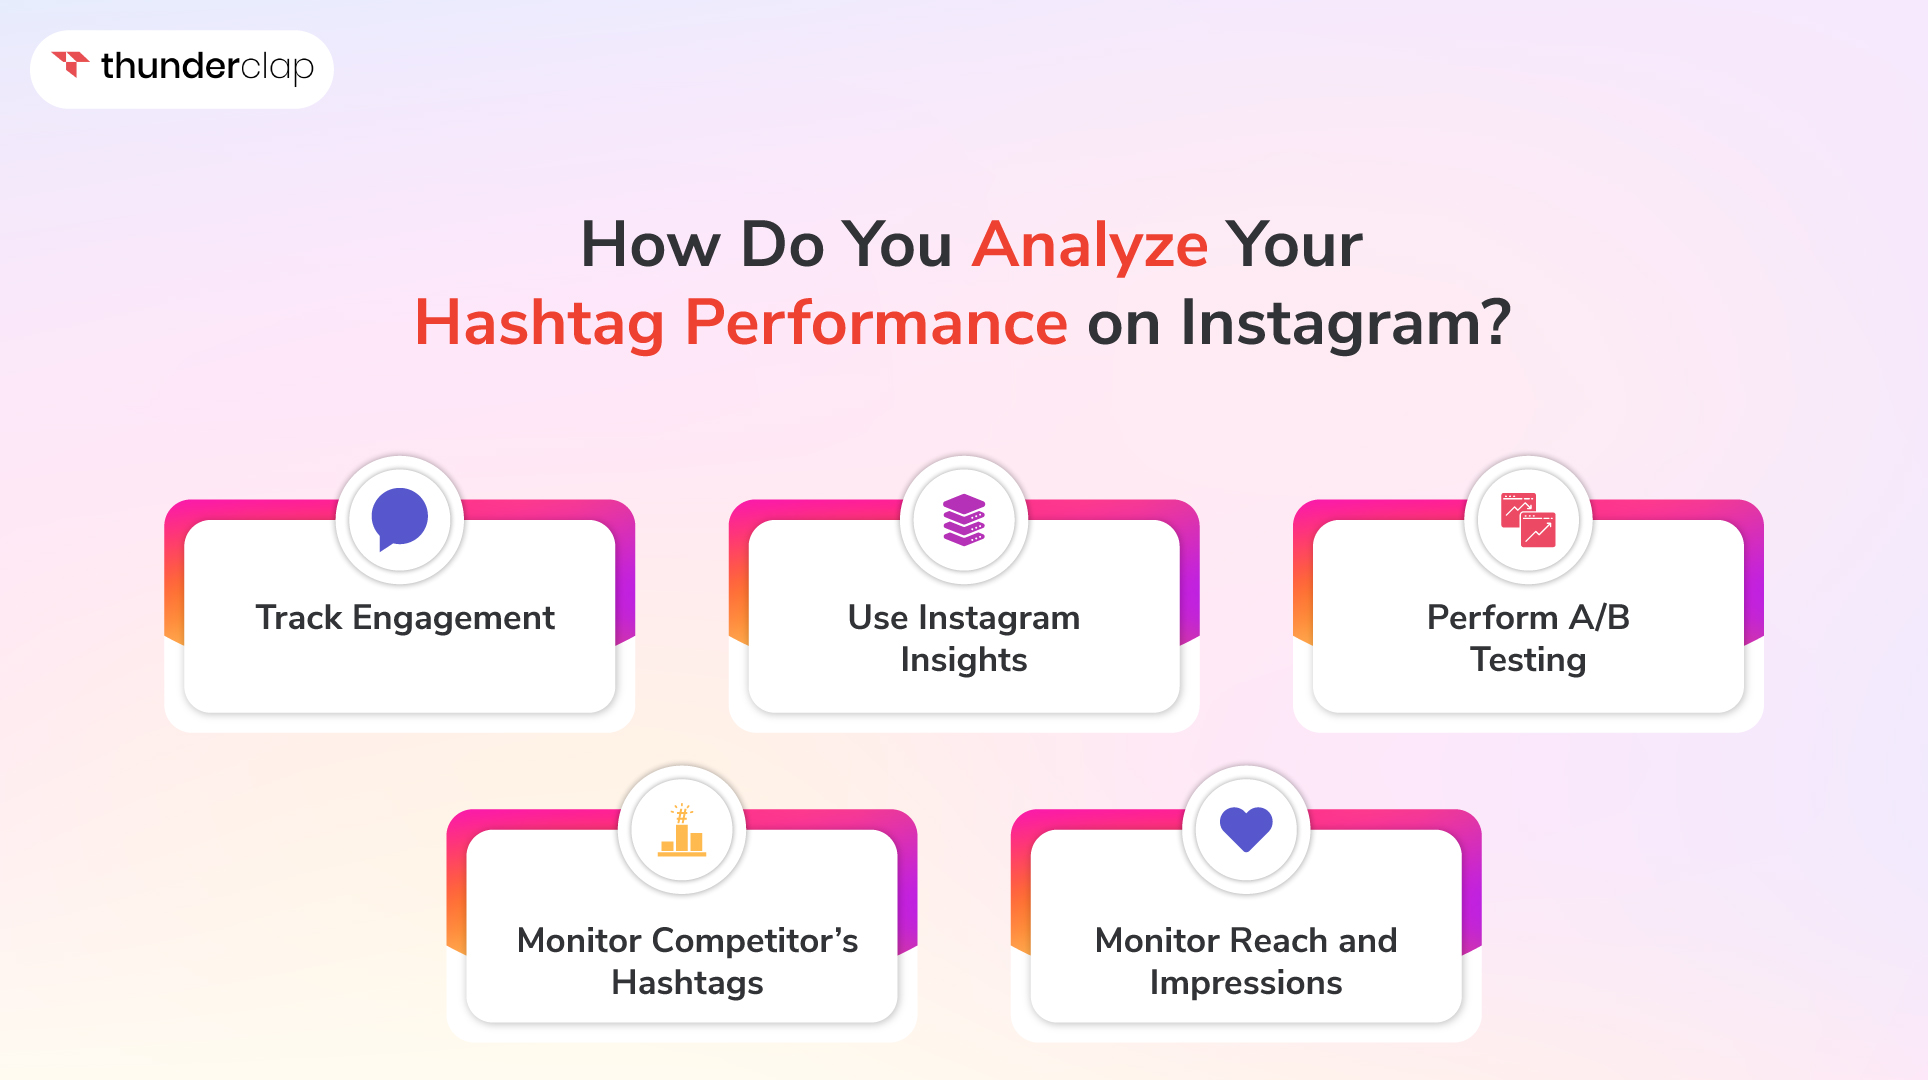 How Do You Analyze Your Hashtag Performance on Instagram